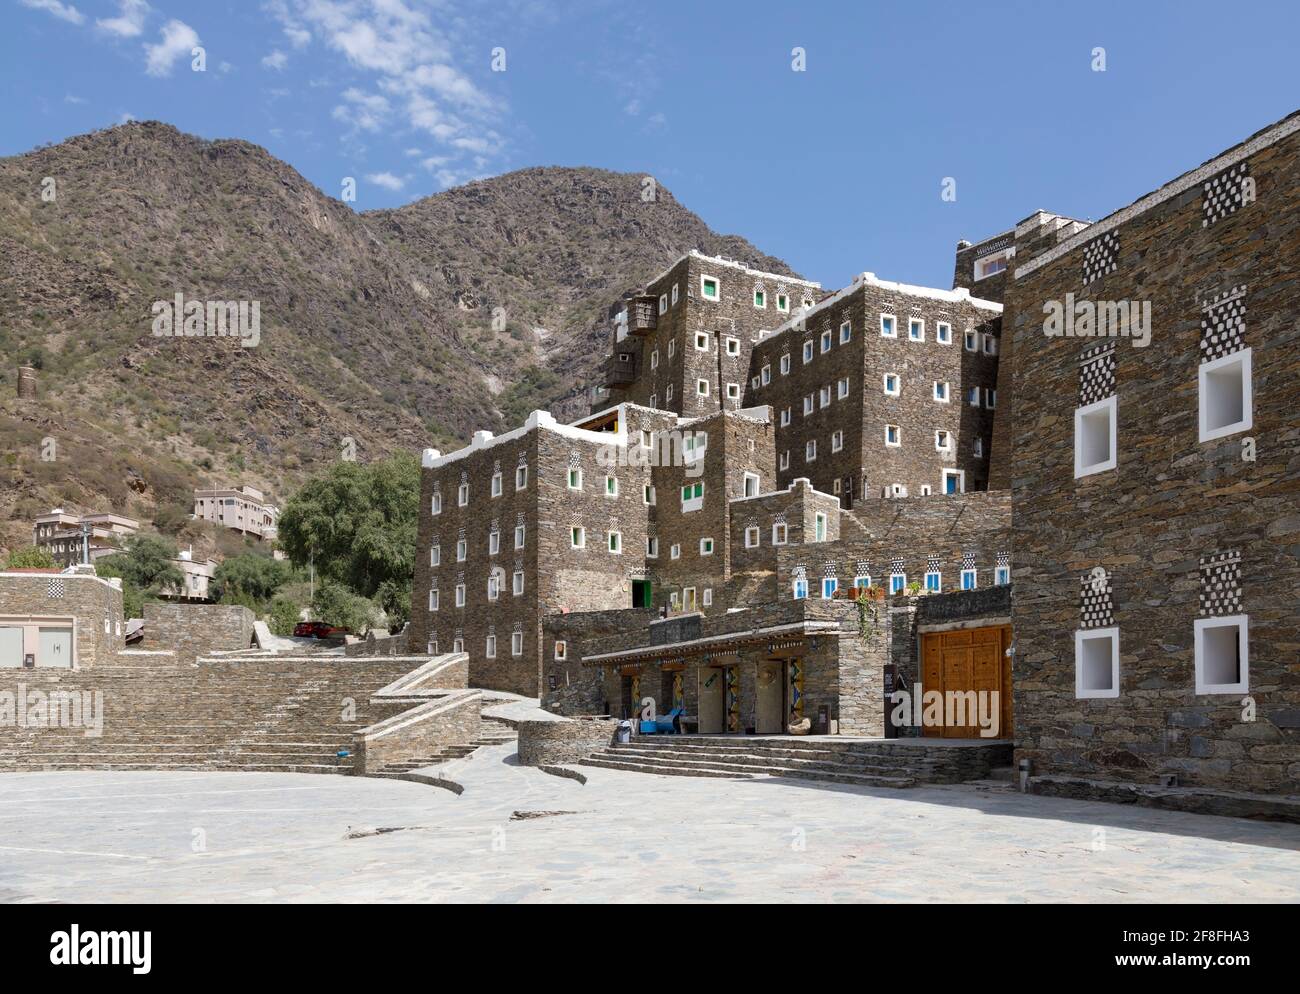 Abha, Saudi Arabia, February 25 2020: The village of Rijal Almaa is built up by 60 multiple-story buildings. All are built in a traditional way with o Stock Photo